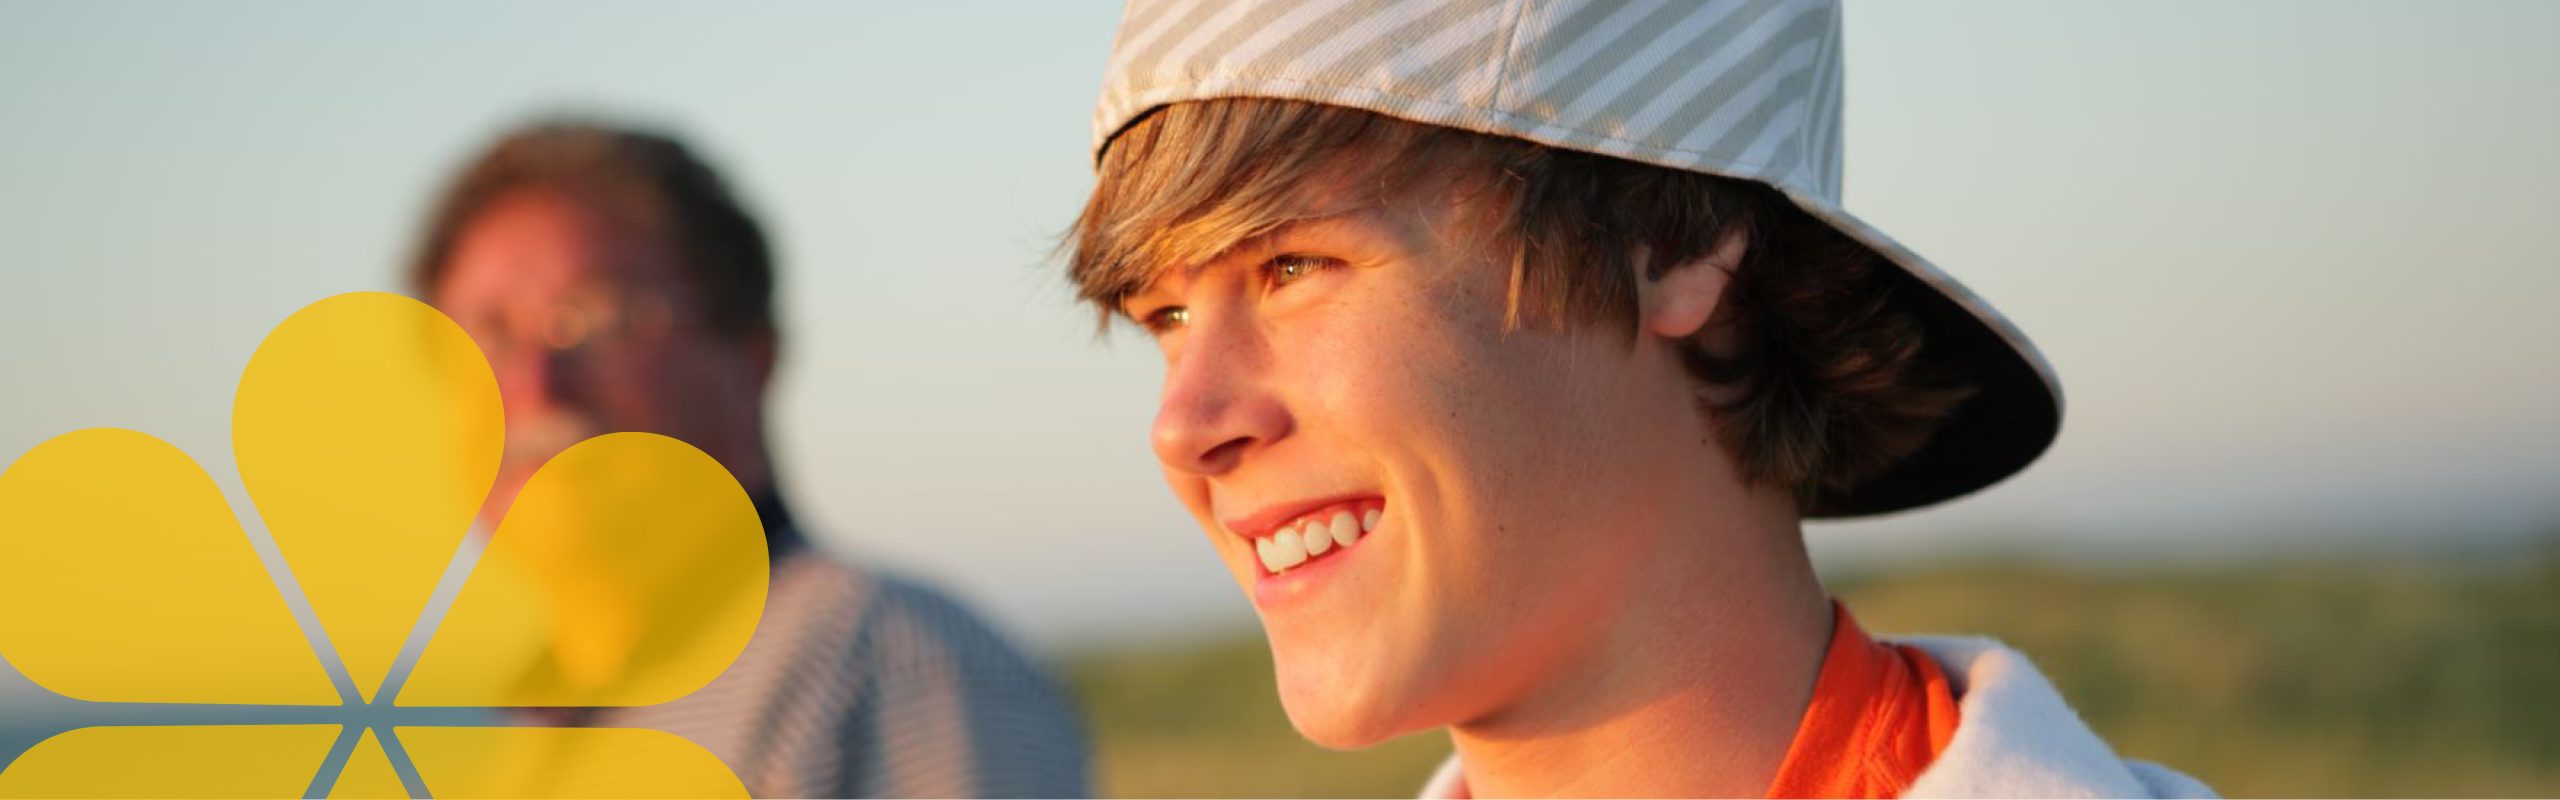 young person wearing a baseball cap backwards and is smiling